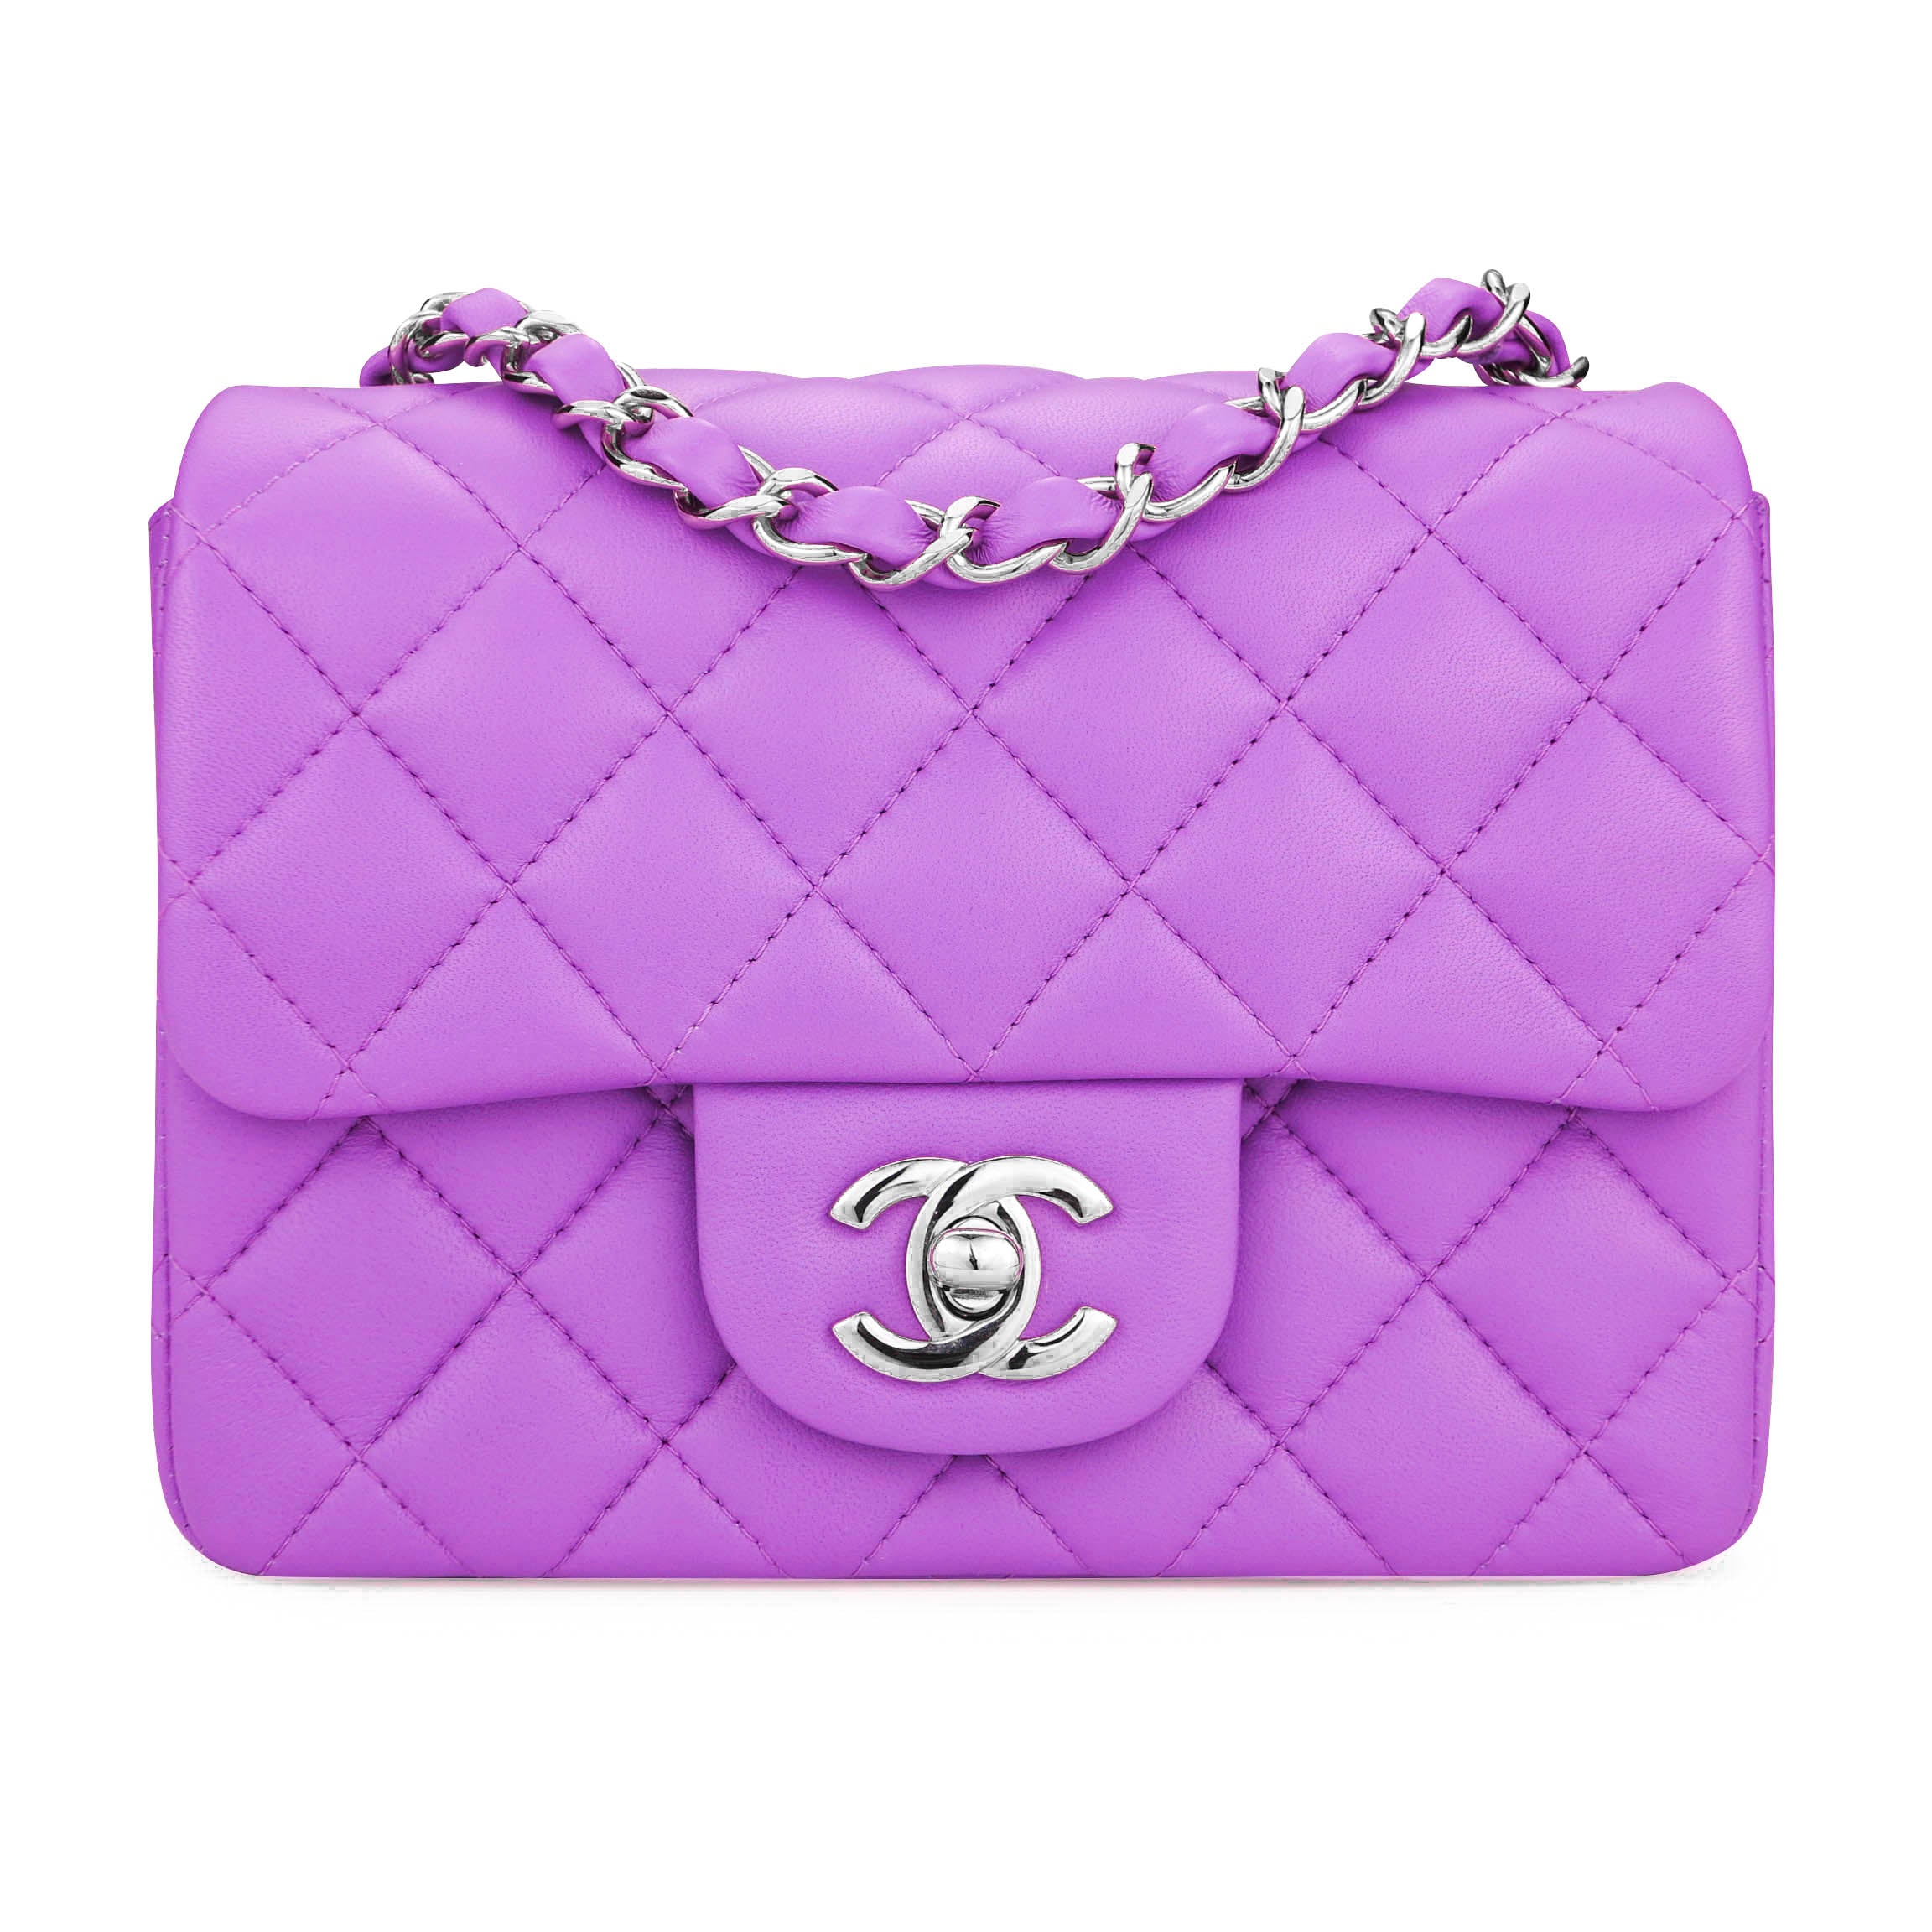 Shop CHANEL 2021-22FW Small Flap Bag (AS2612 B05971 NC901) by FORMIDABLE